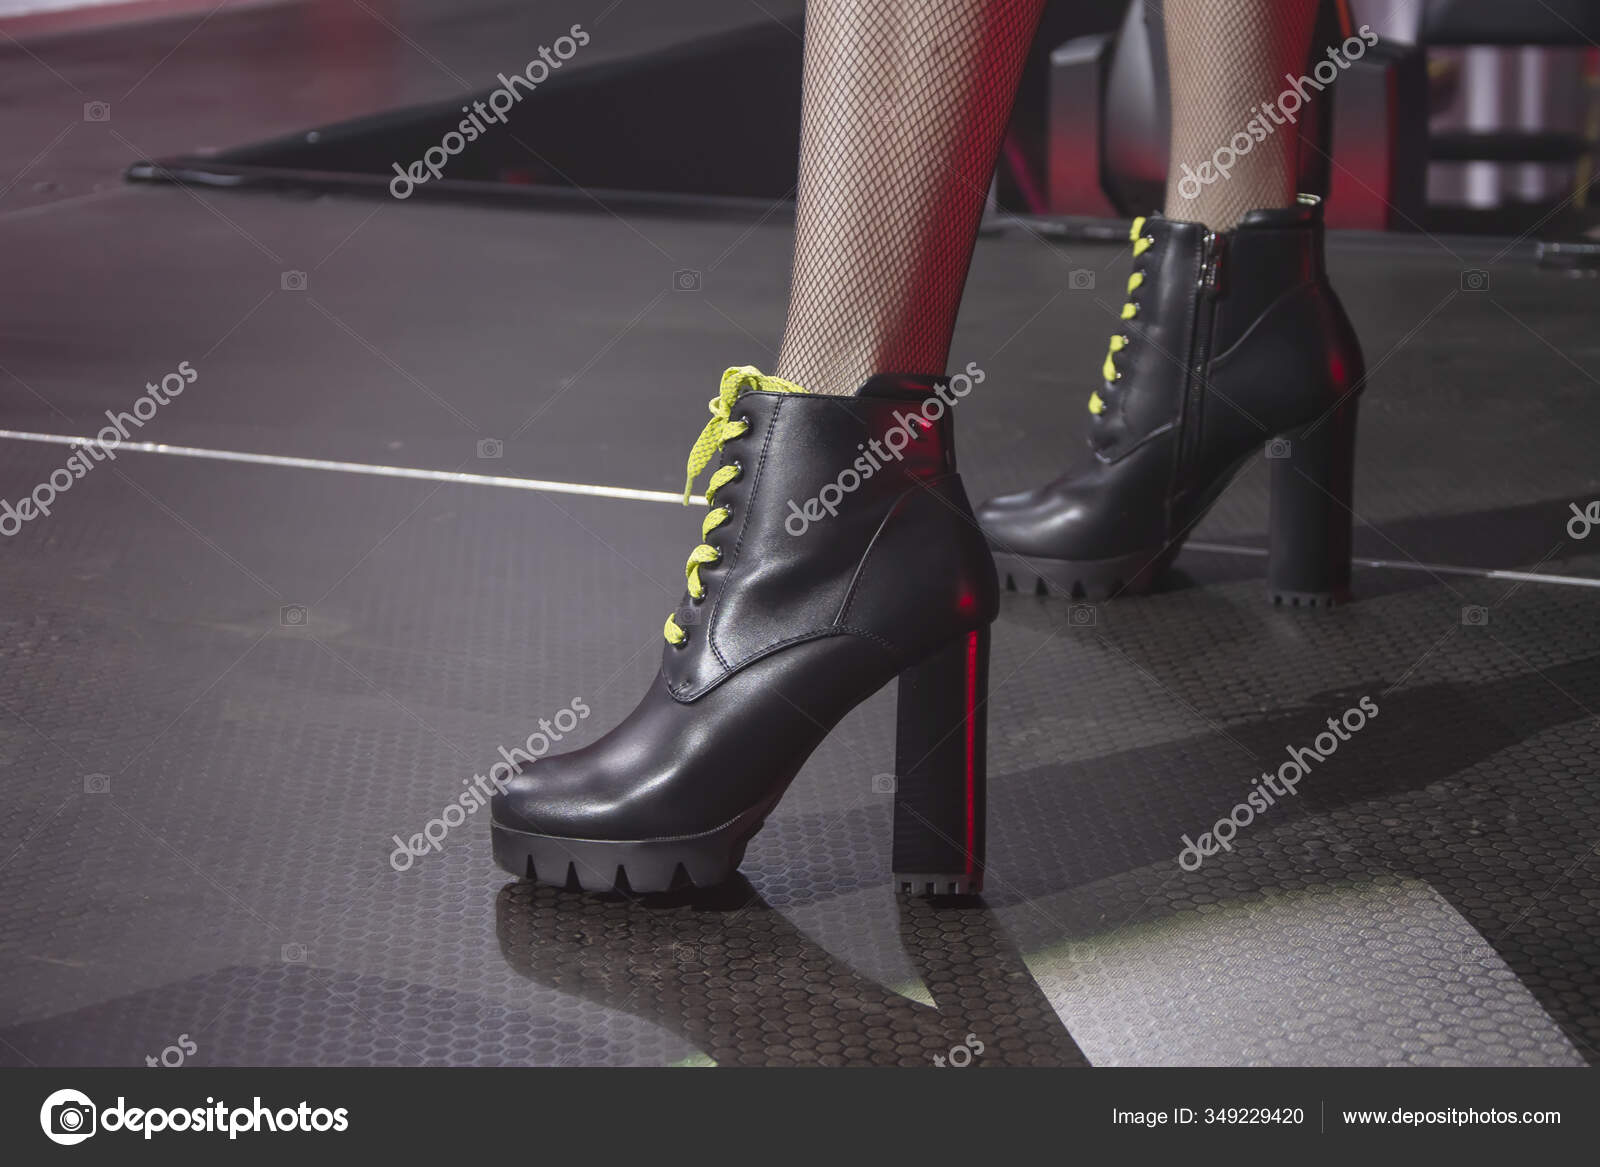 Podium Ankle Boot - Shoes